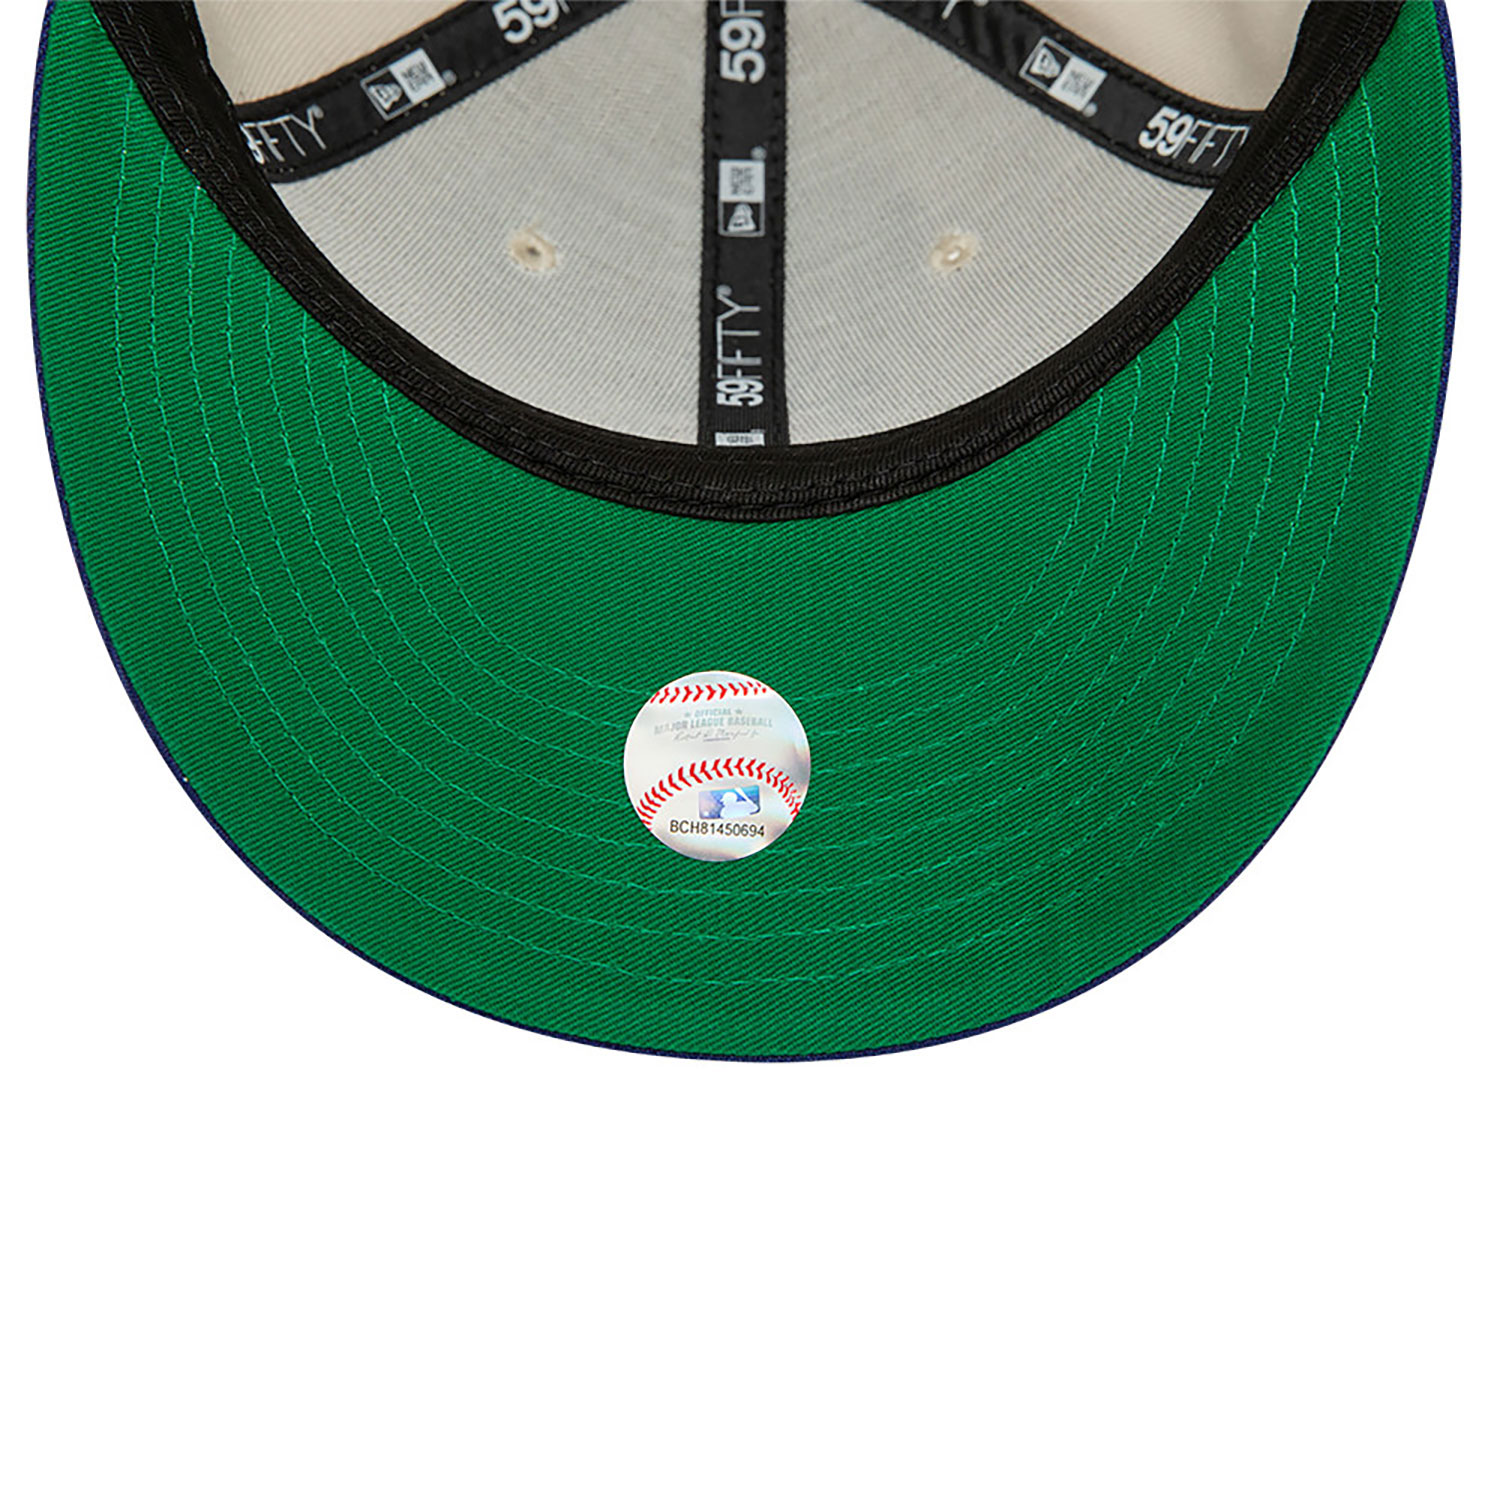 Beige Chicago Cubs Mascot 59FIFTY Low Profile Cap